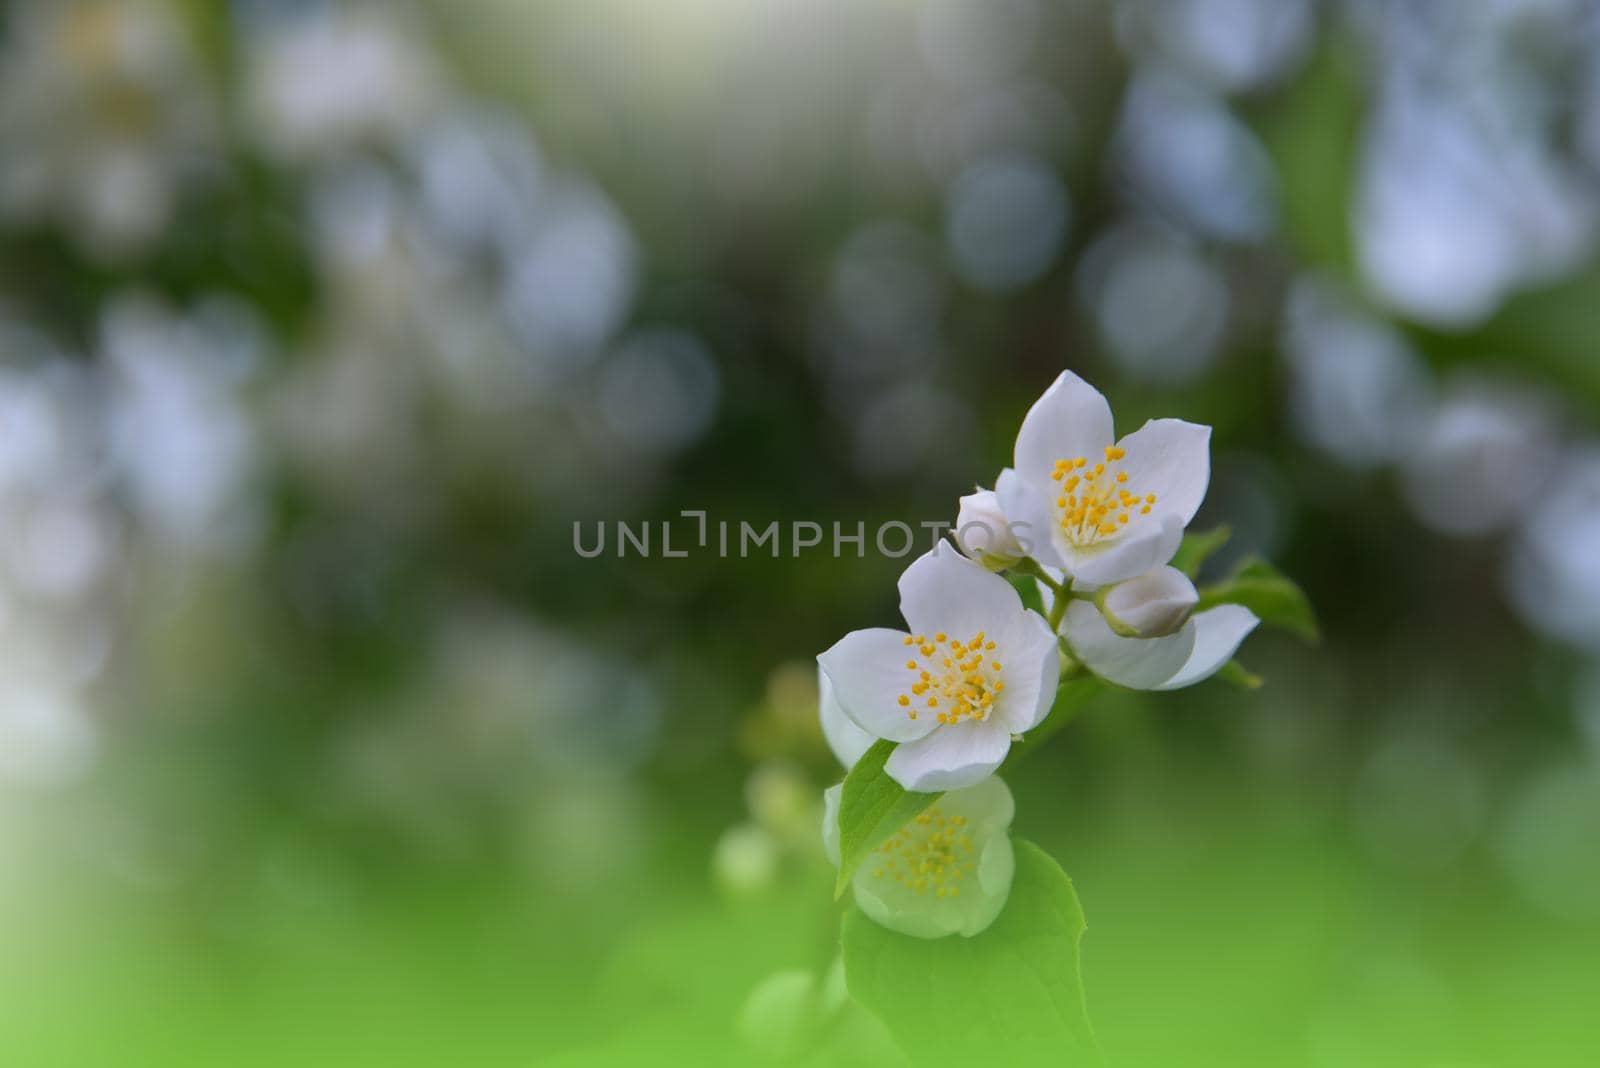 Beautiful Green Nature Background.Floral Art Design.Abstract Macro Photography.Colorful Flower.Blooming Spring Flowers.Creative Artistic Wallpaper.Celebration,love.Close up.Happy Holidays.Copy Space.White Blossom Jasmine Flowers.Wedding Invitation.